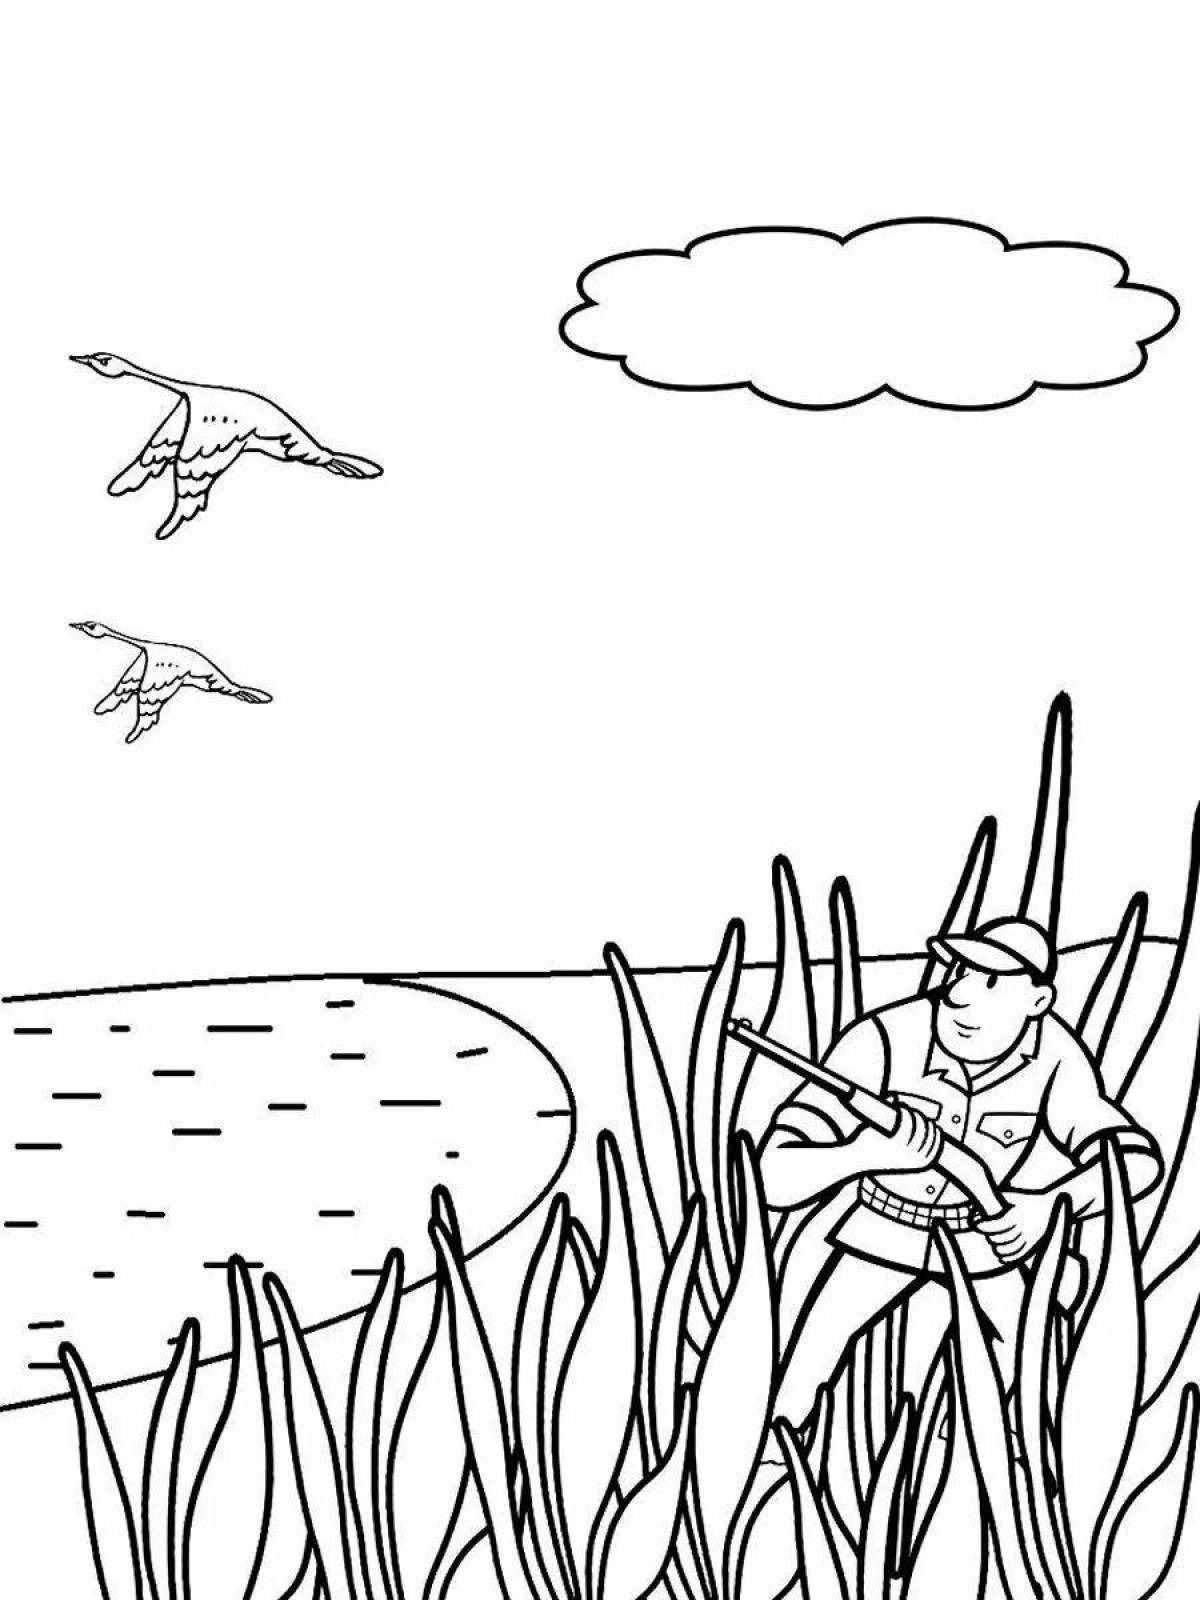 Glorious hunter coloring pages for kids